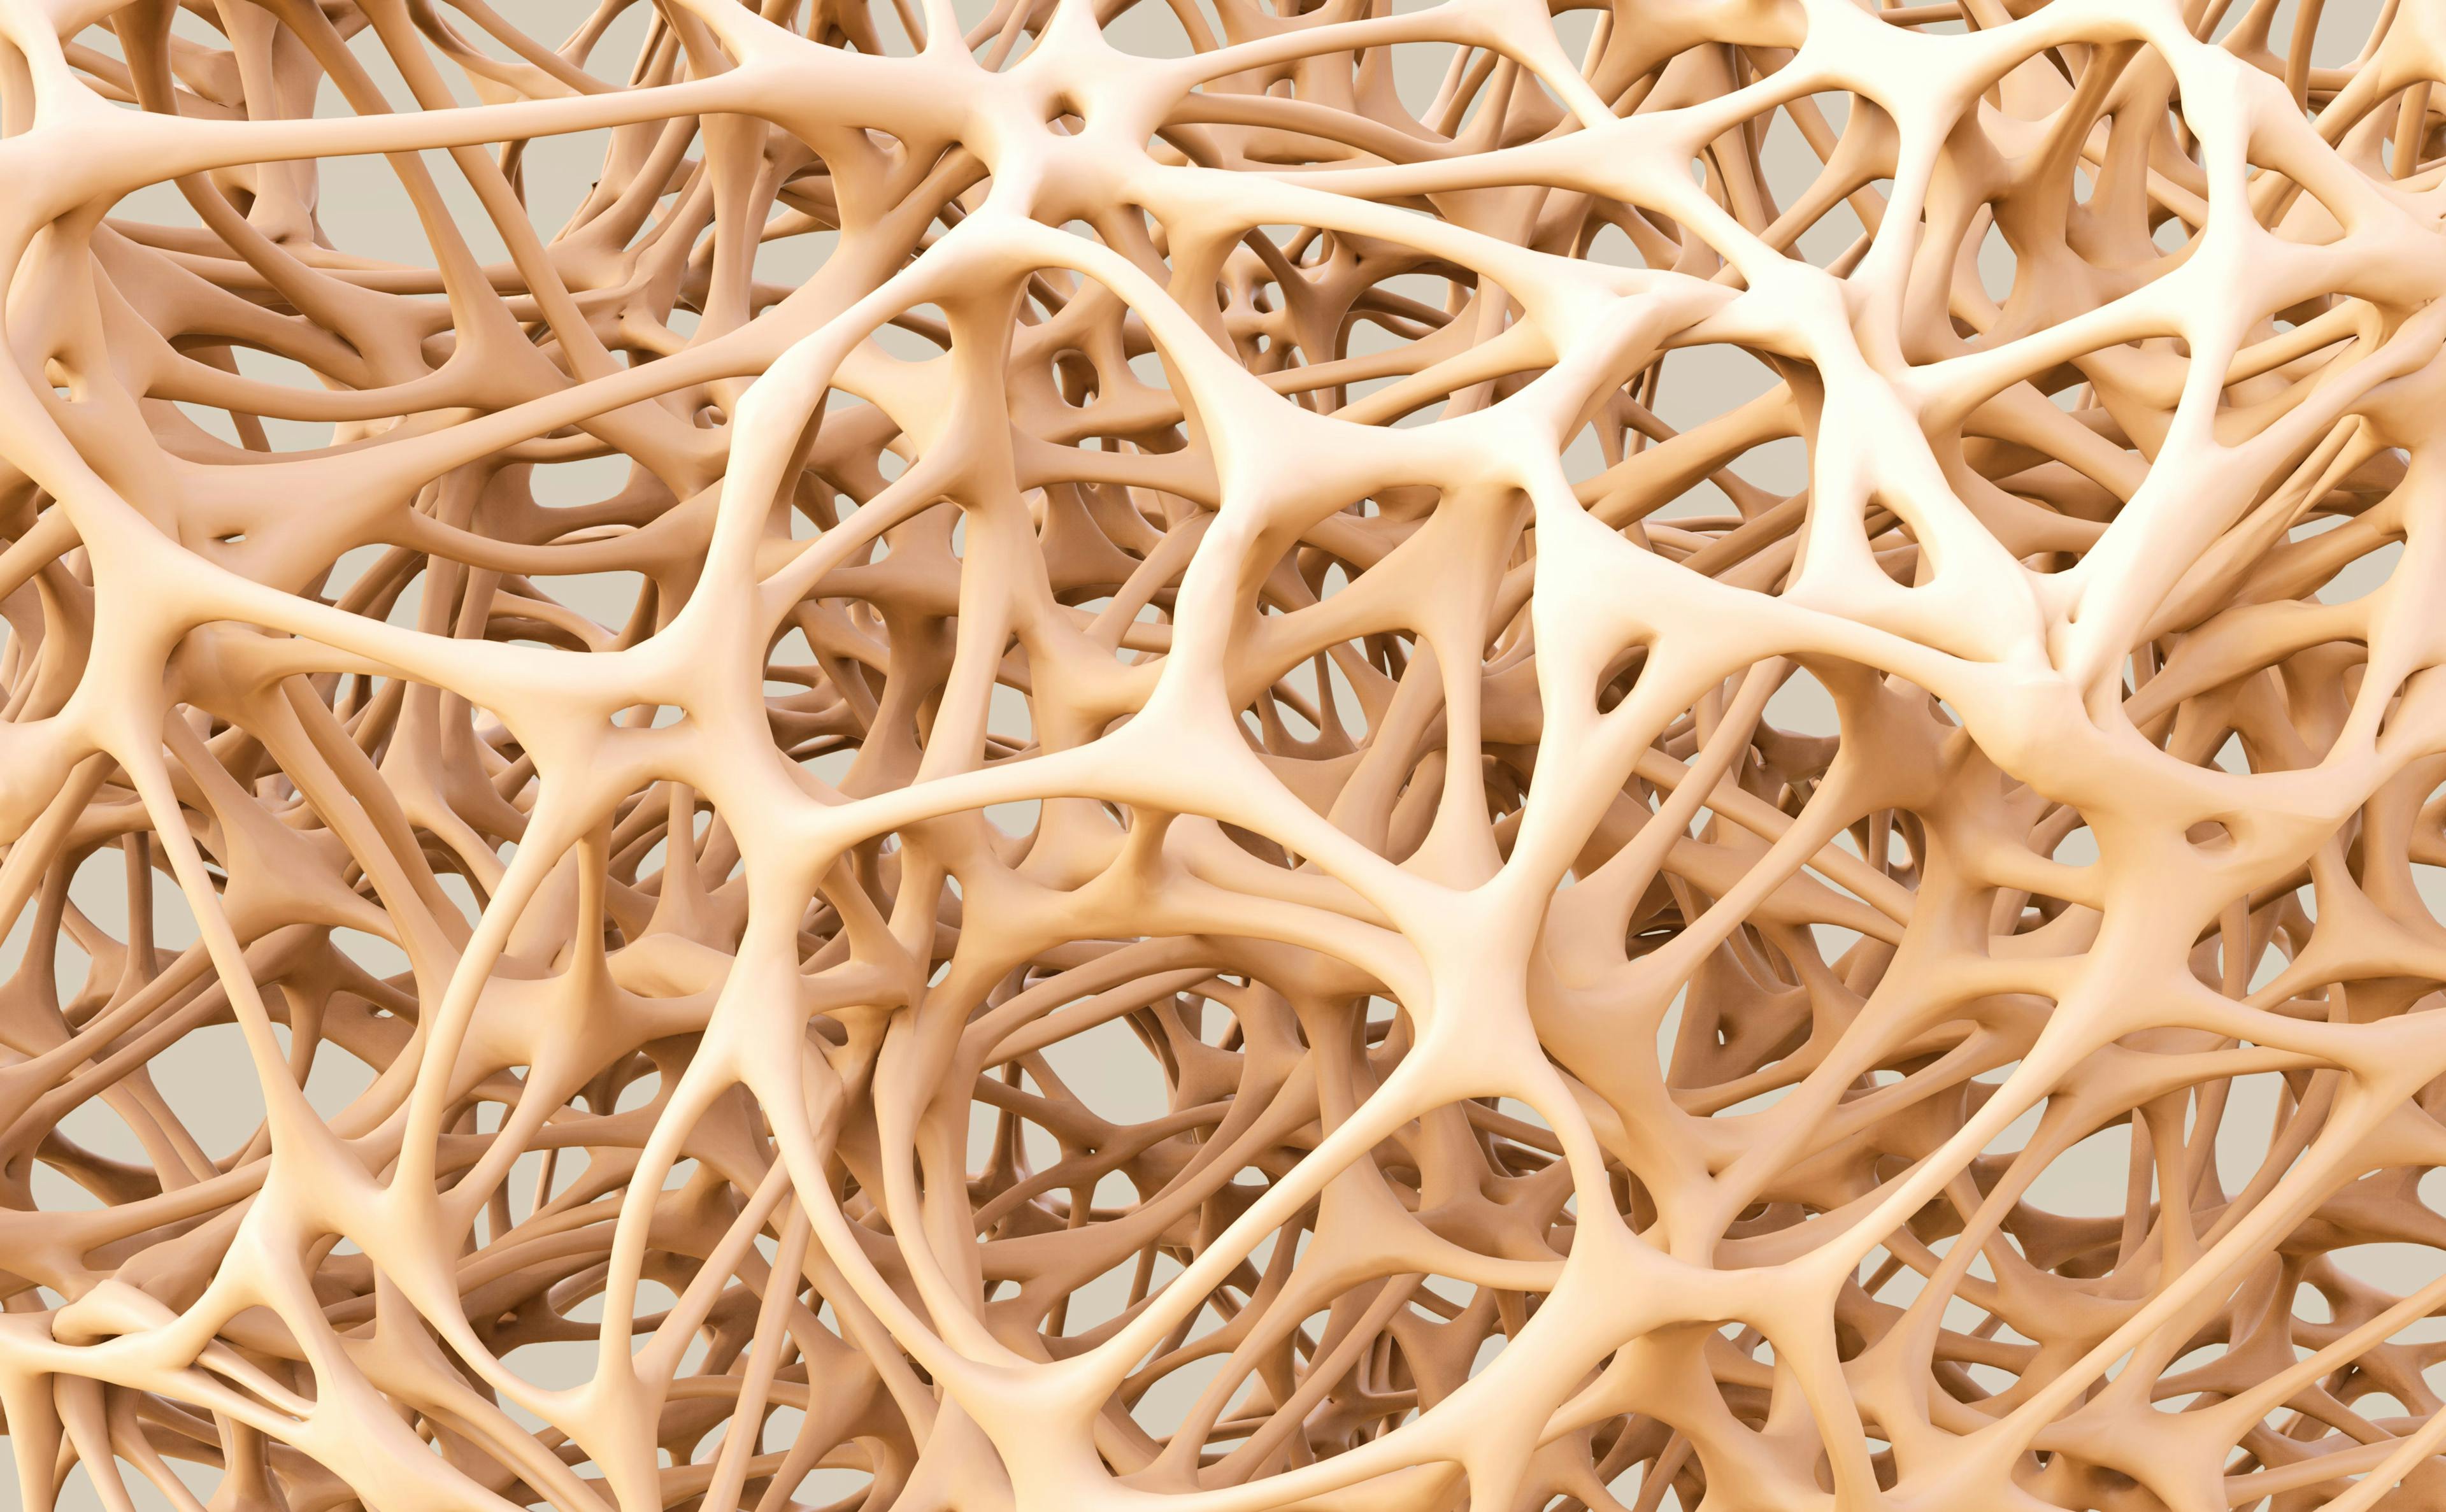 A close-up of bone marrow structure.